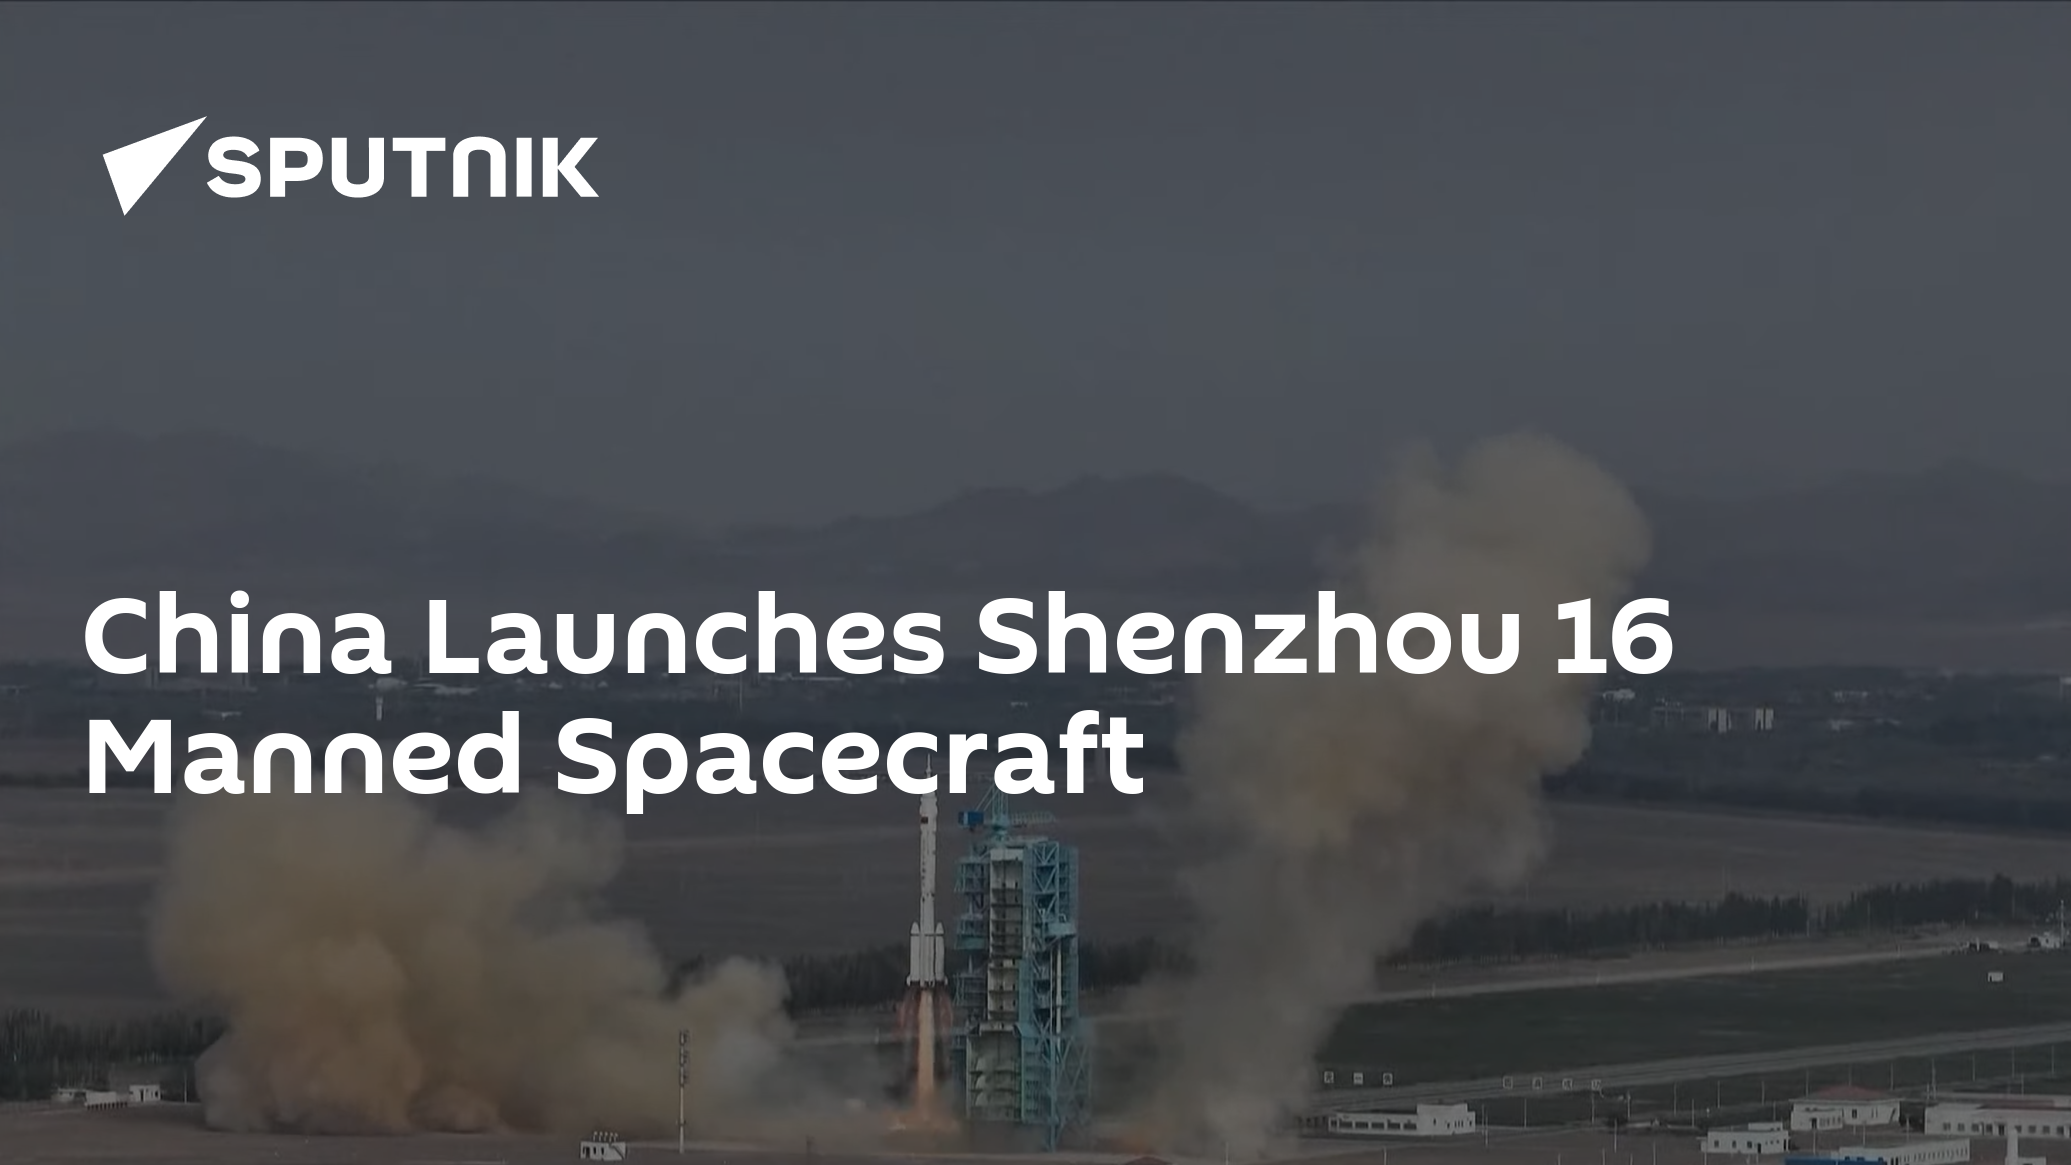 China Launches Shenzhou 16 Manned Spacecraft